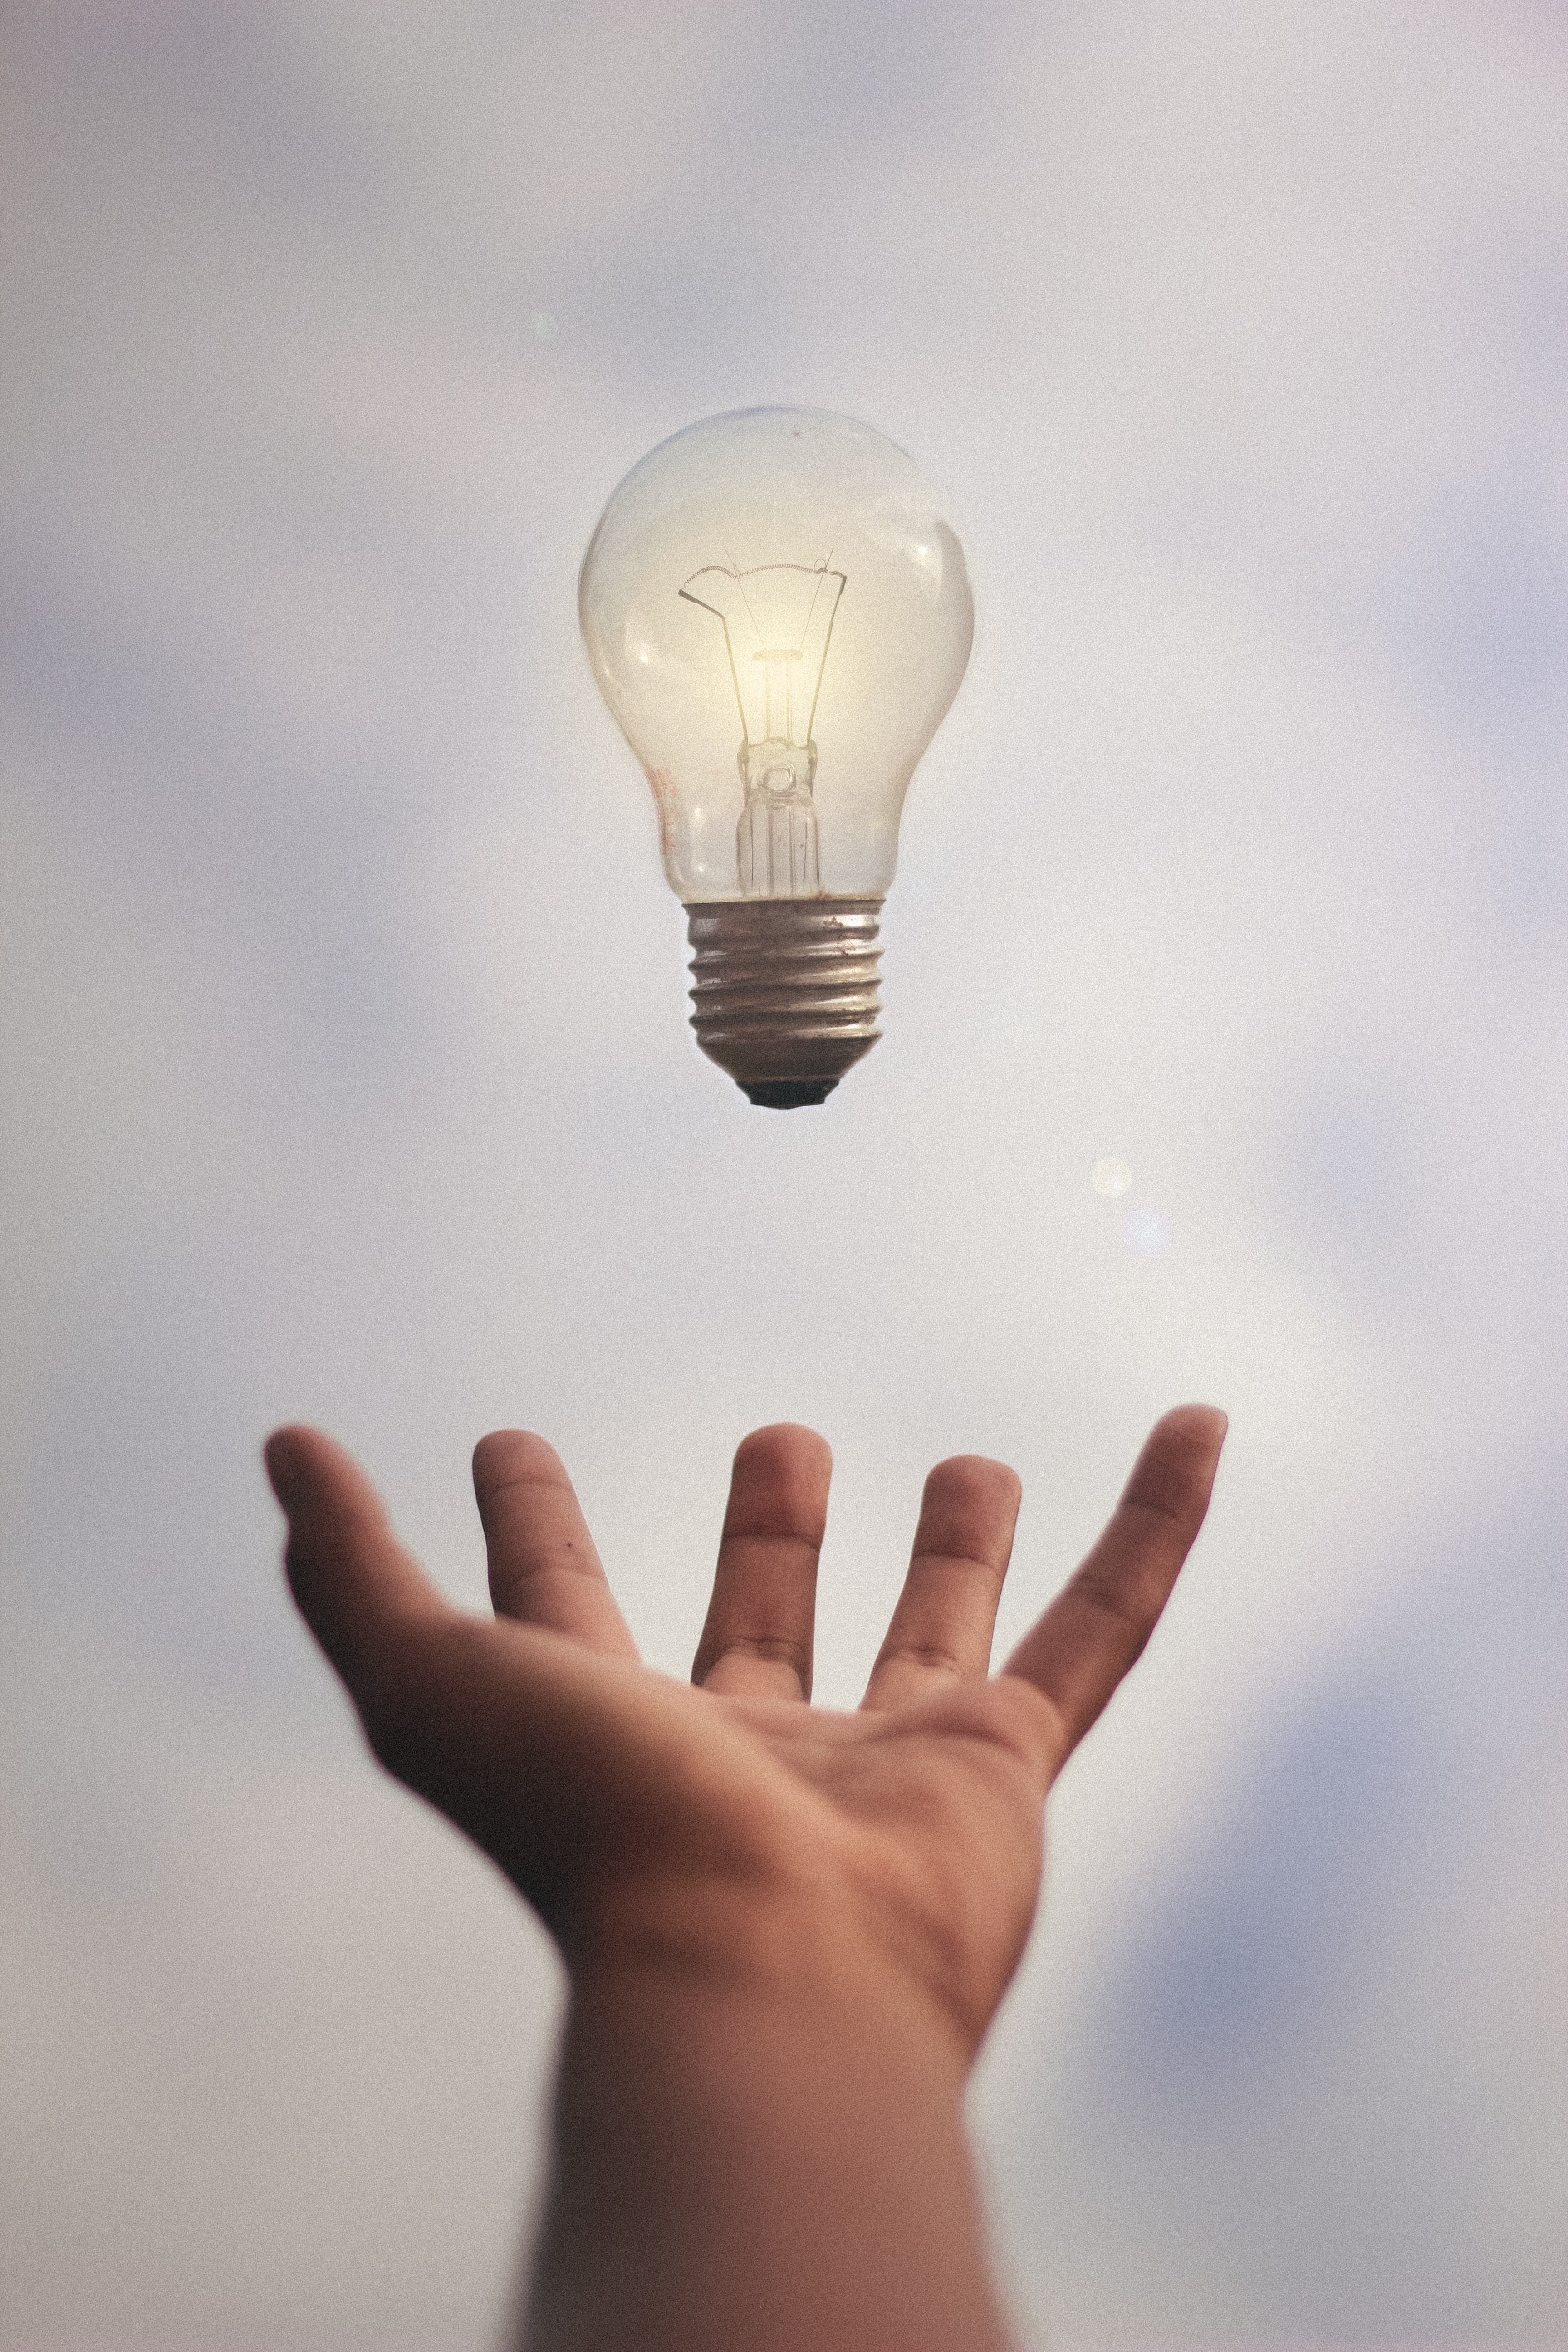 A light bulb with a hand underneath, as if suspending the bulb in midair